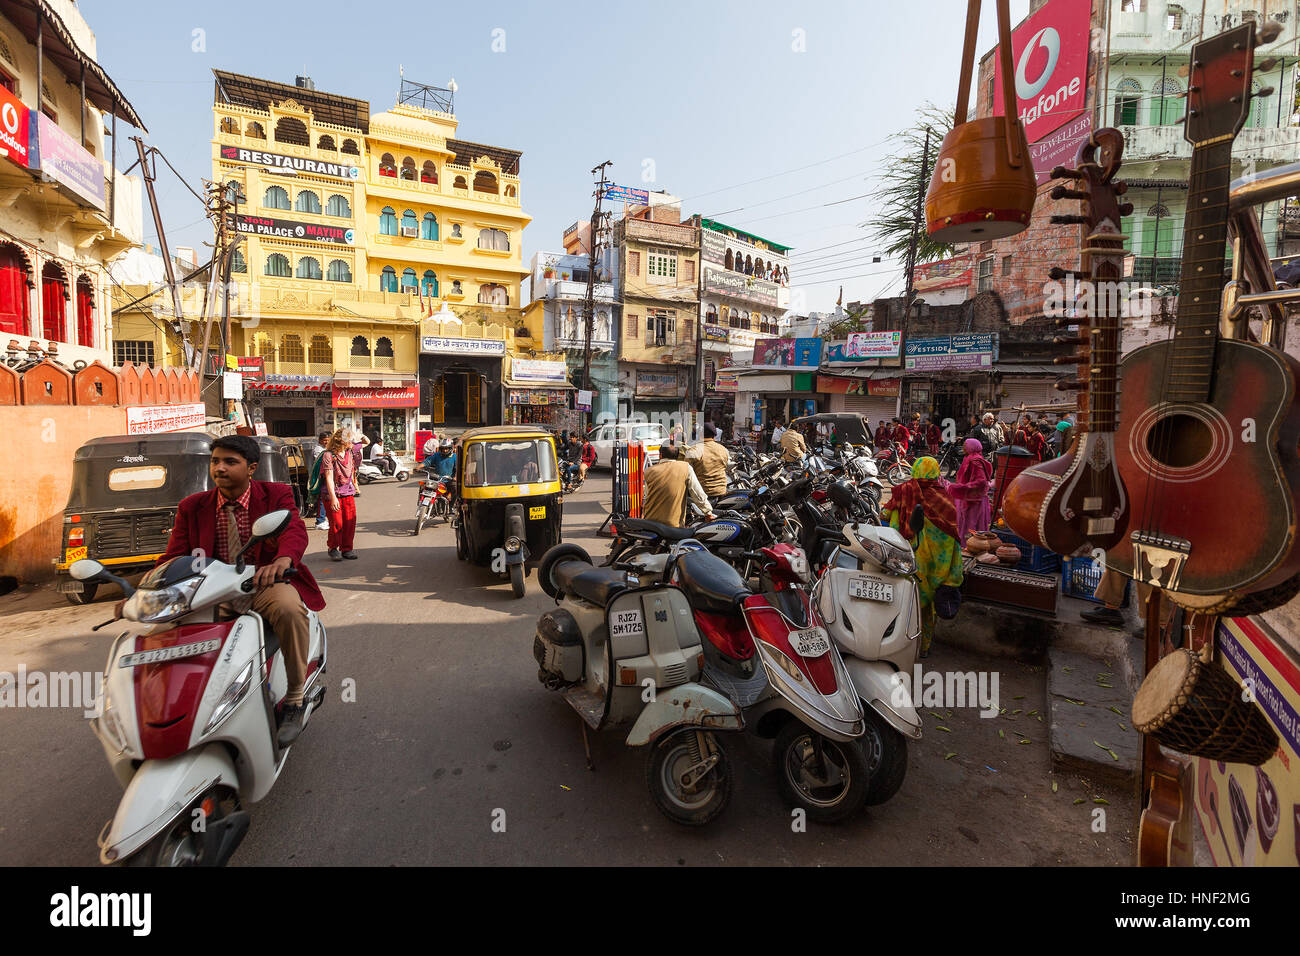 UDAIPUR, INDIA - JANUARY 16, 2015 : Busy street scene in Jagdish Chowk, a central town square in Udaipur filled with mopeds, rickshaws, locals, touris Stock Photo